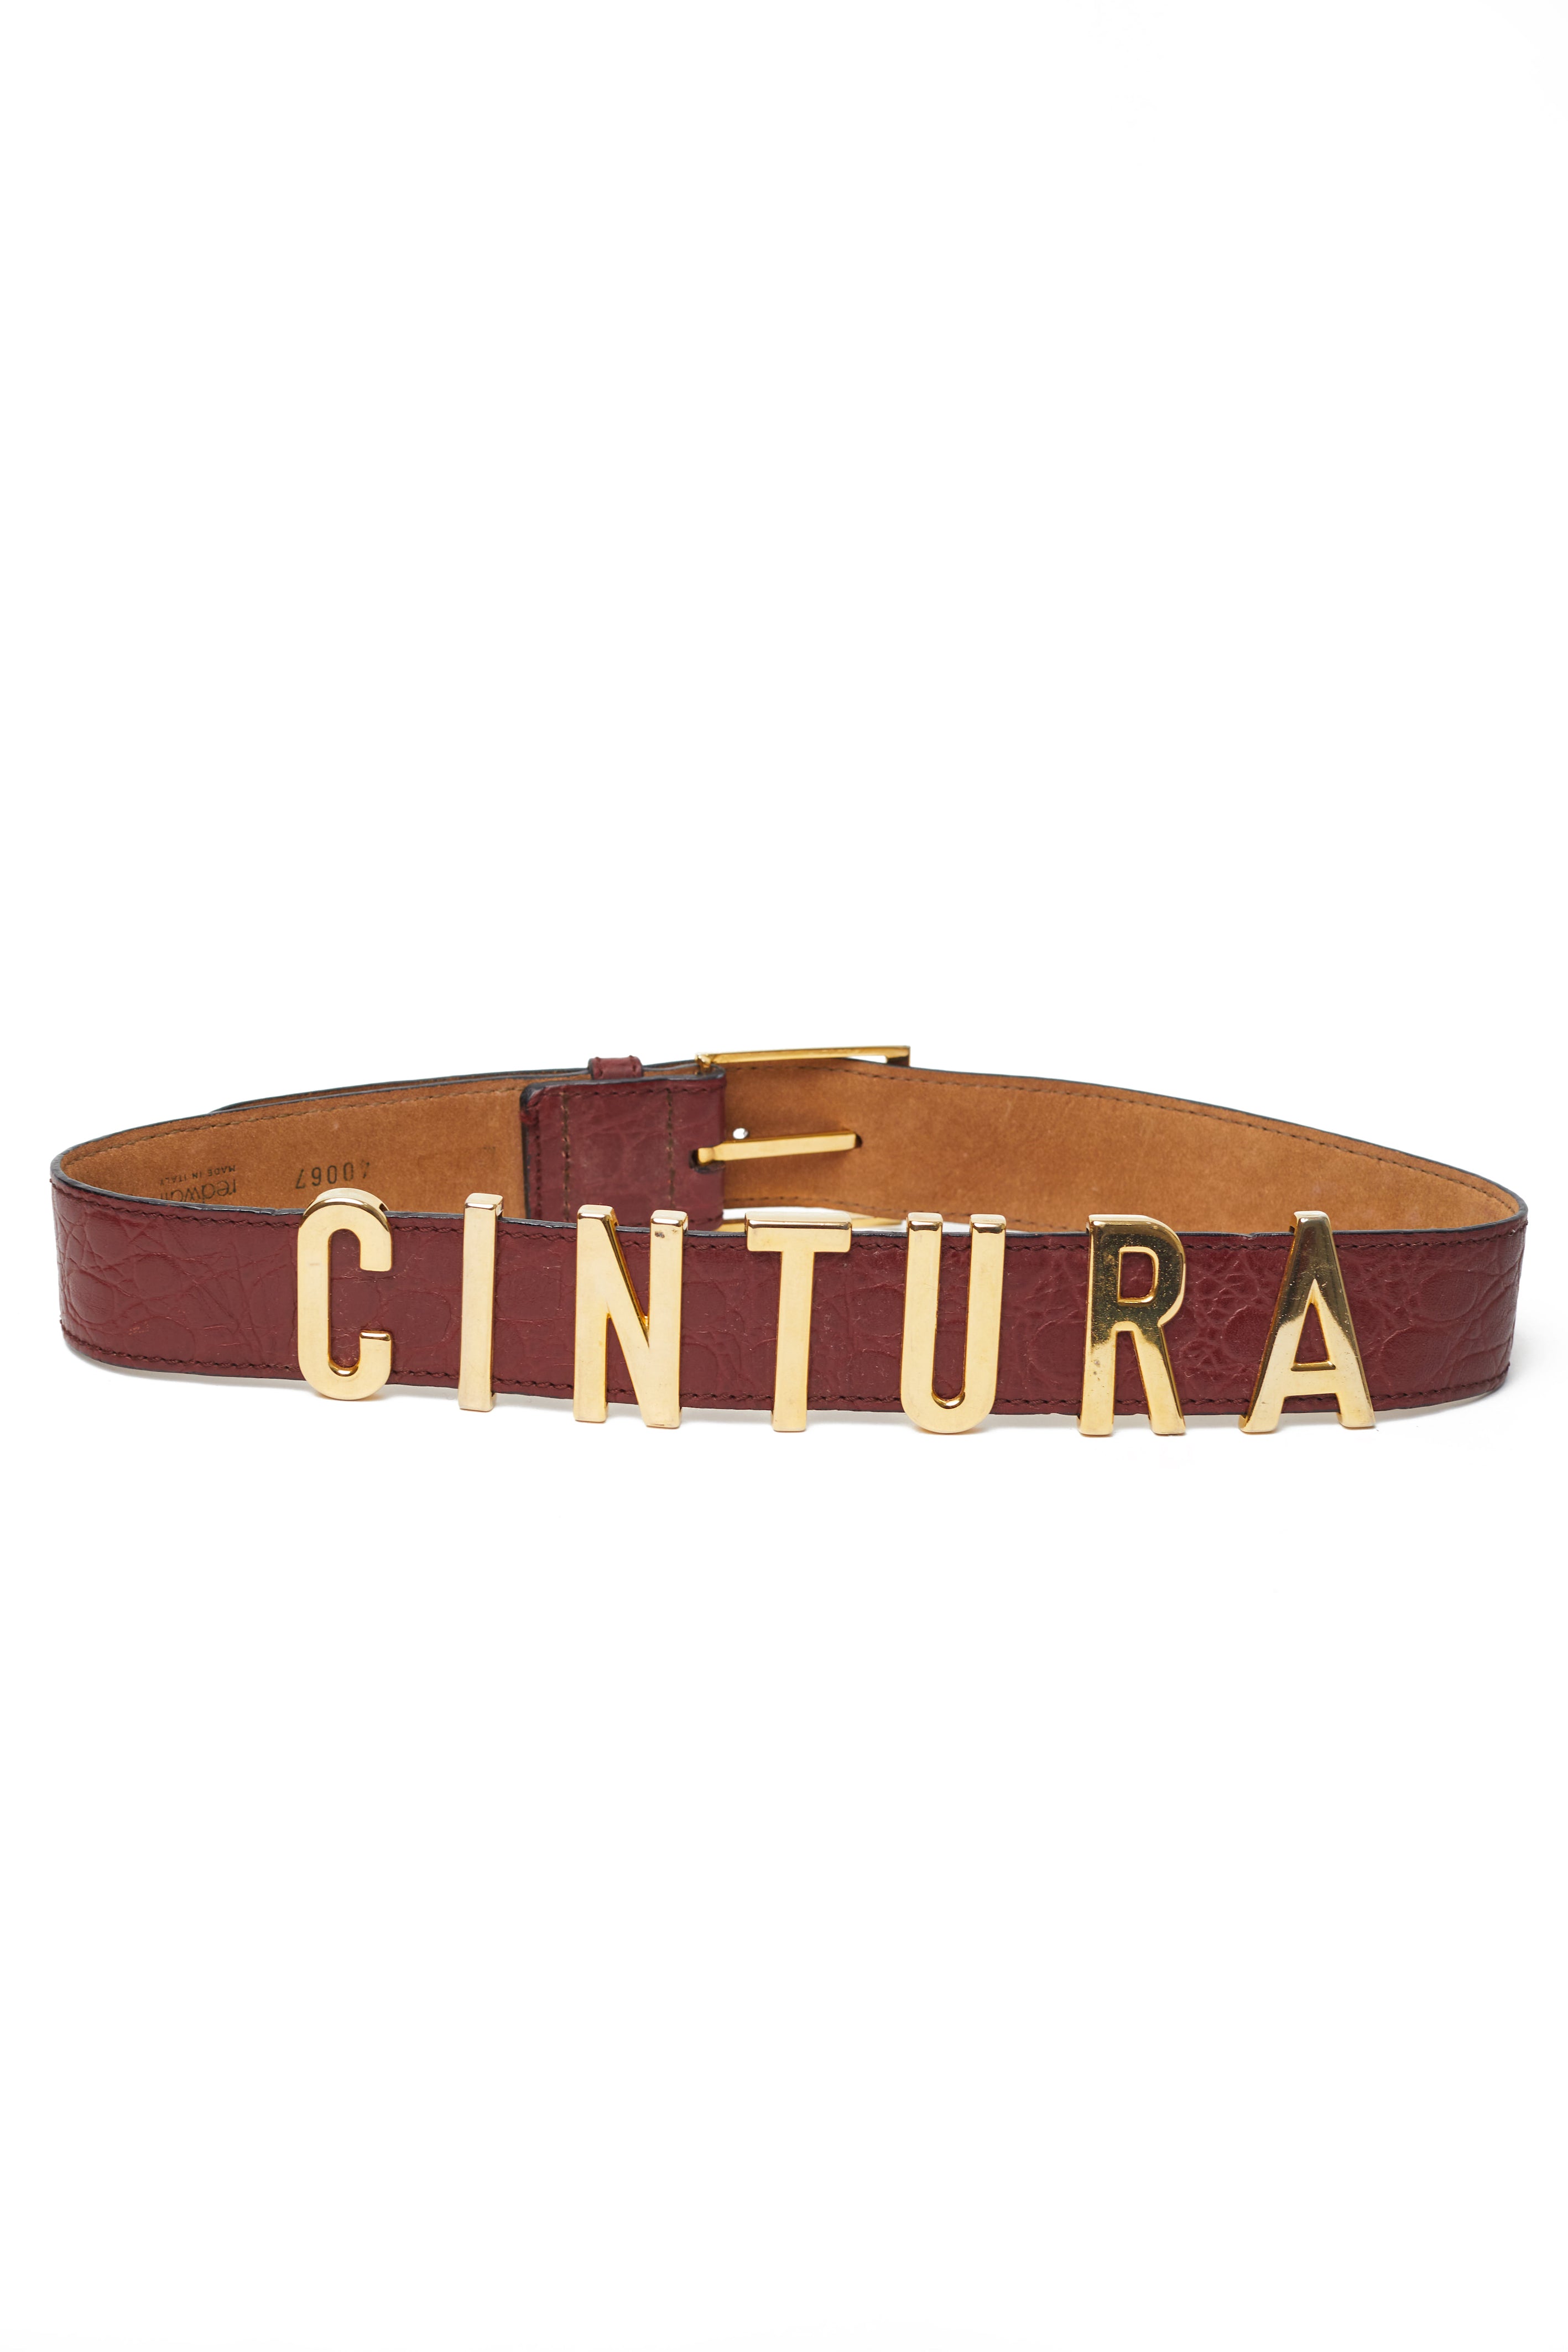 Moschino <br> 90's Moschino by Redwall 'Cintura' letter croc effect leather belt